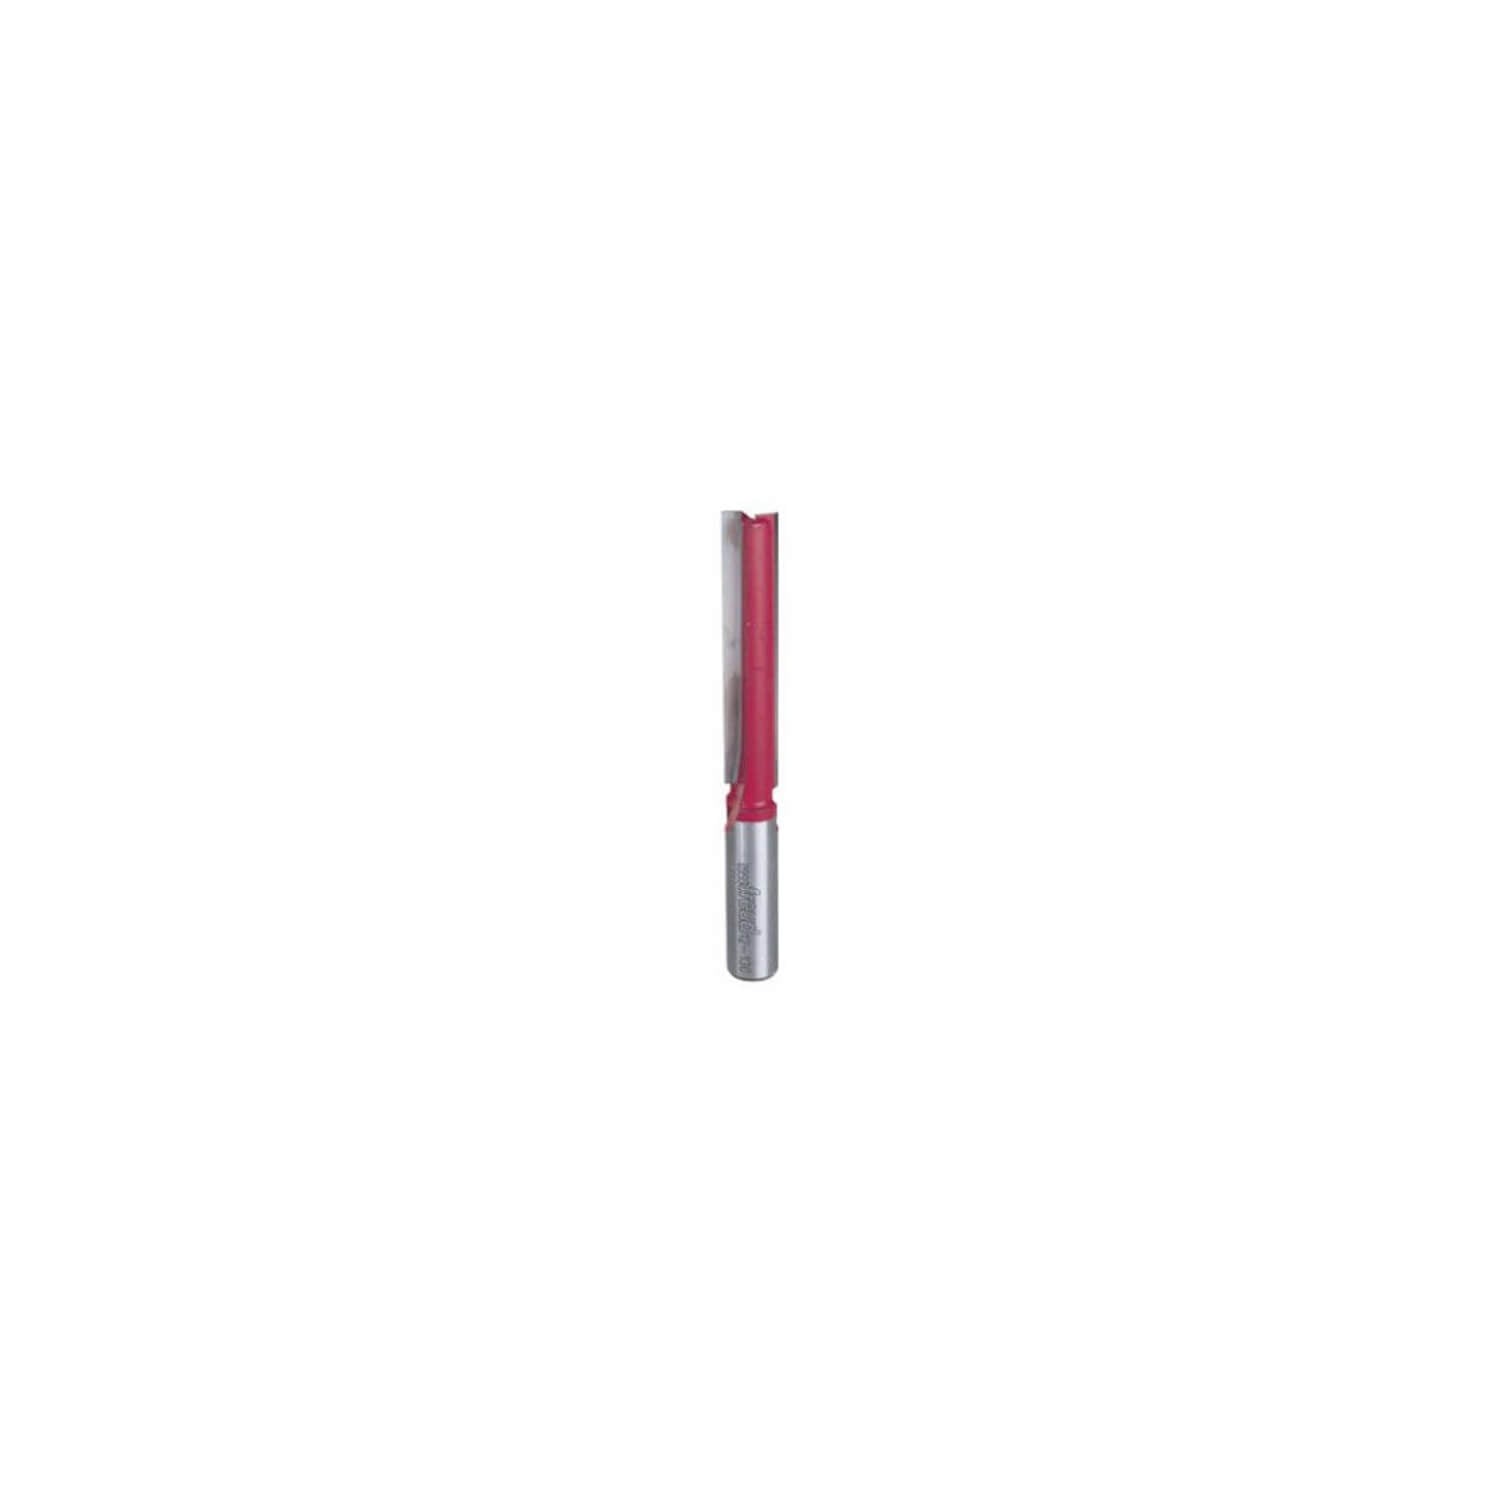 Freud 1/2" (Dia.) Double Flute Straight Bit with 1/2" Shank (12-130) - wise-line-tools